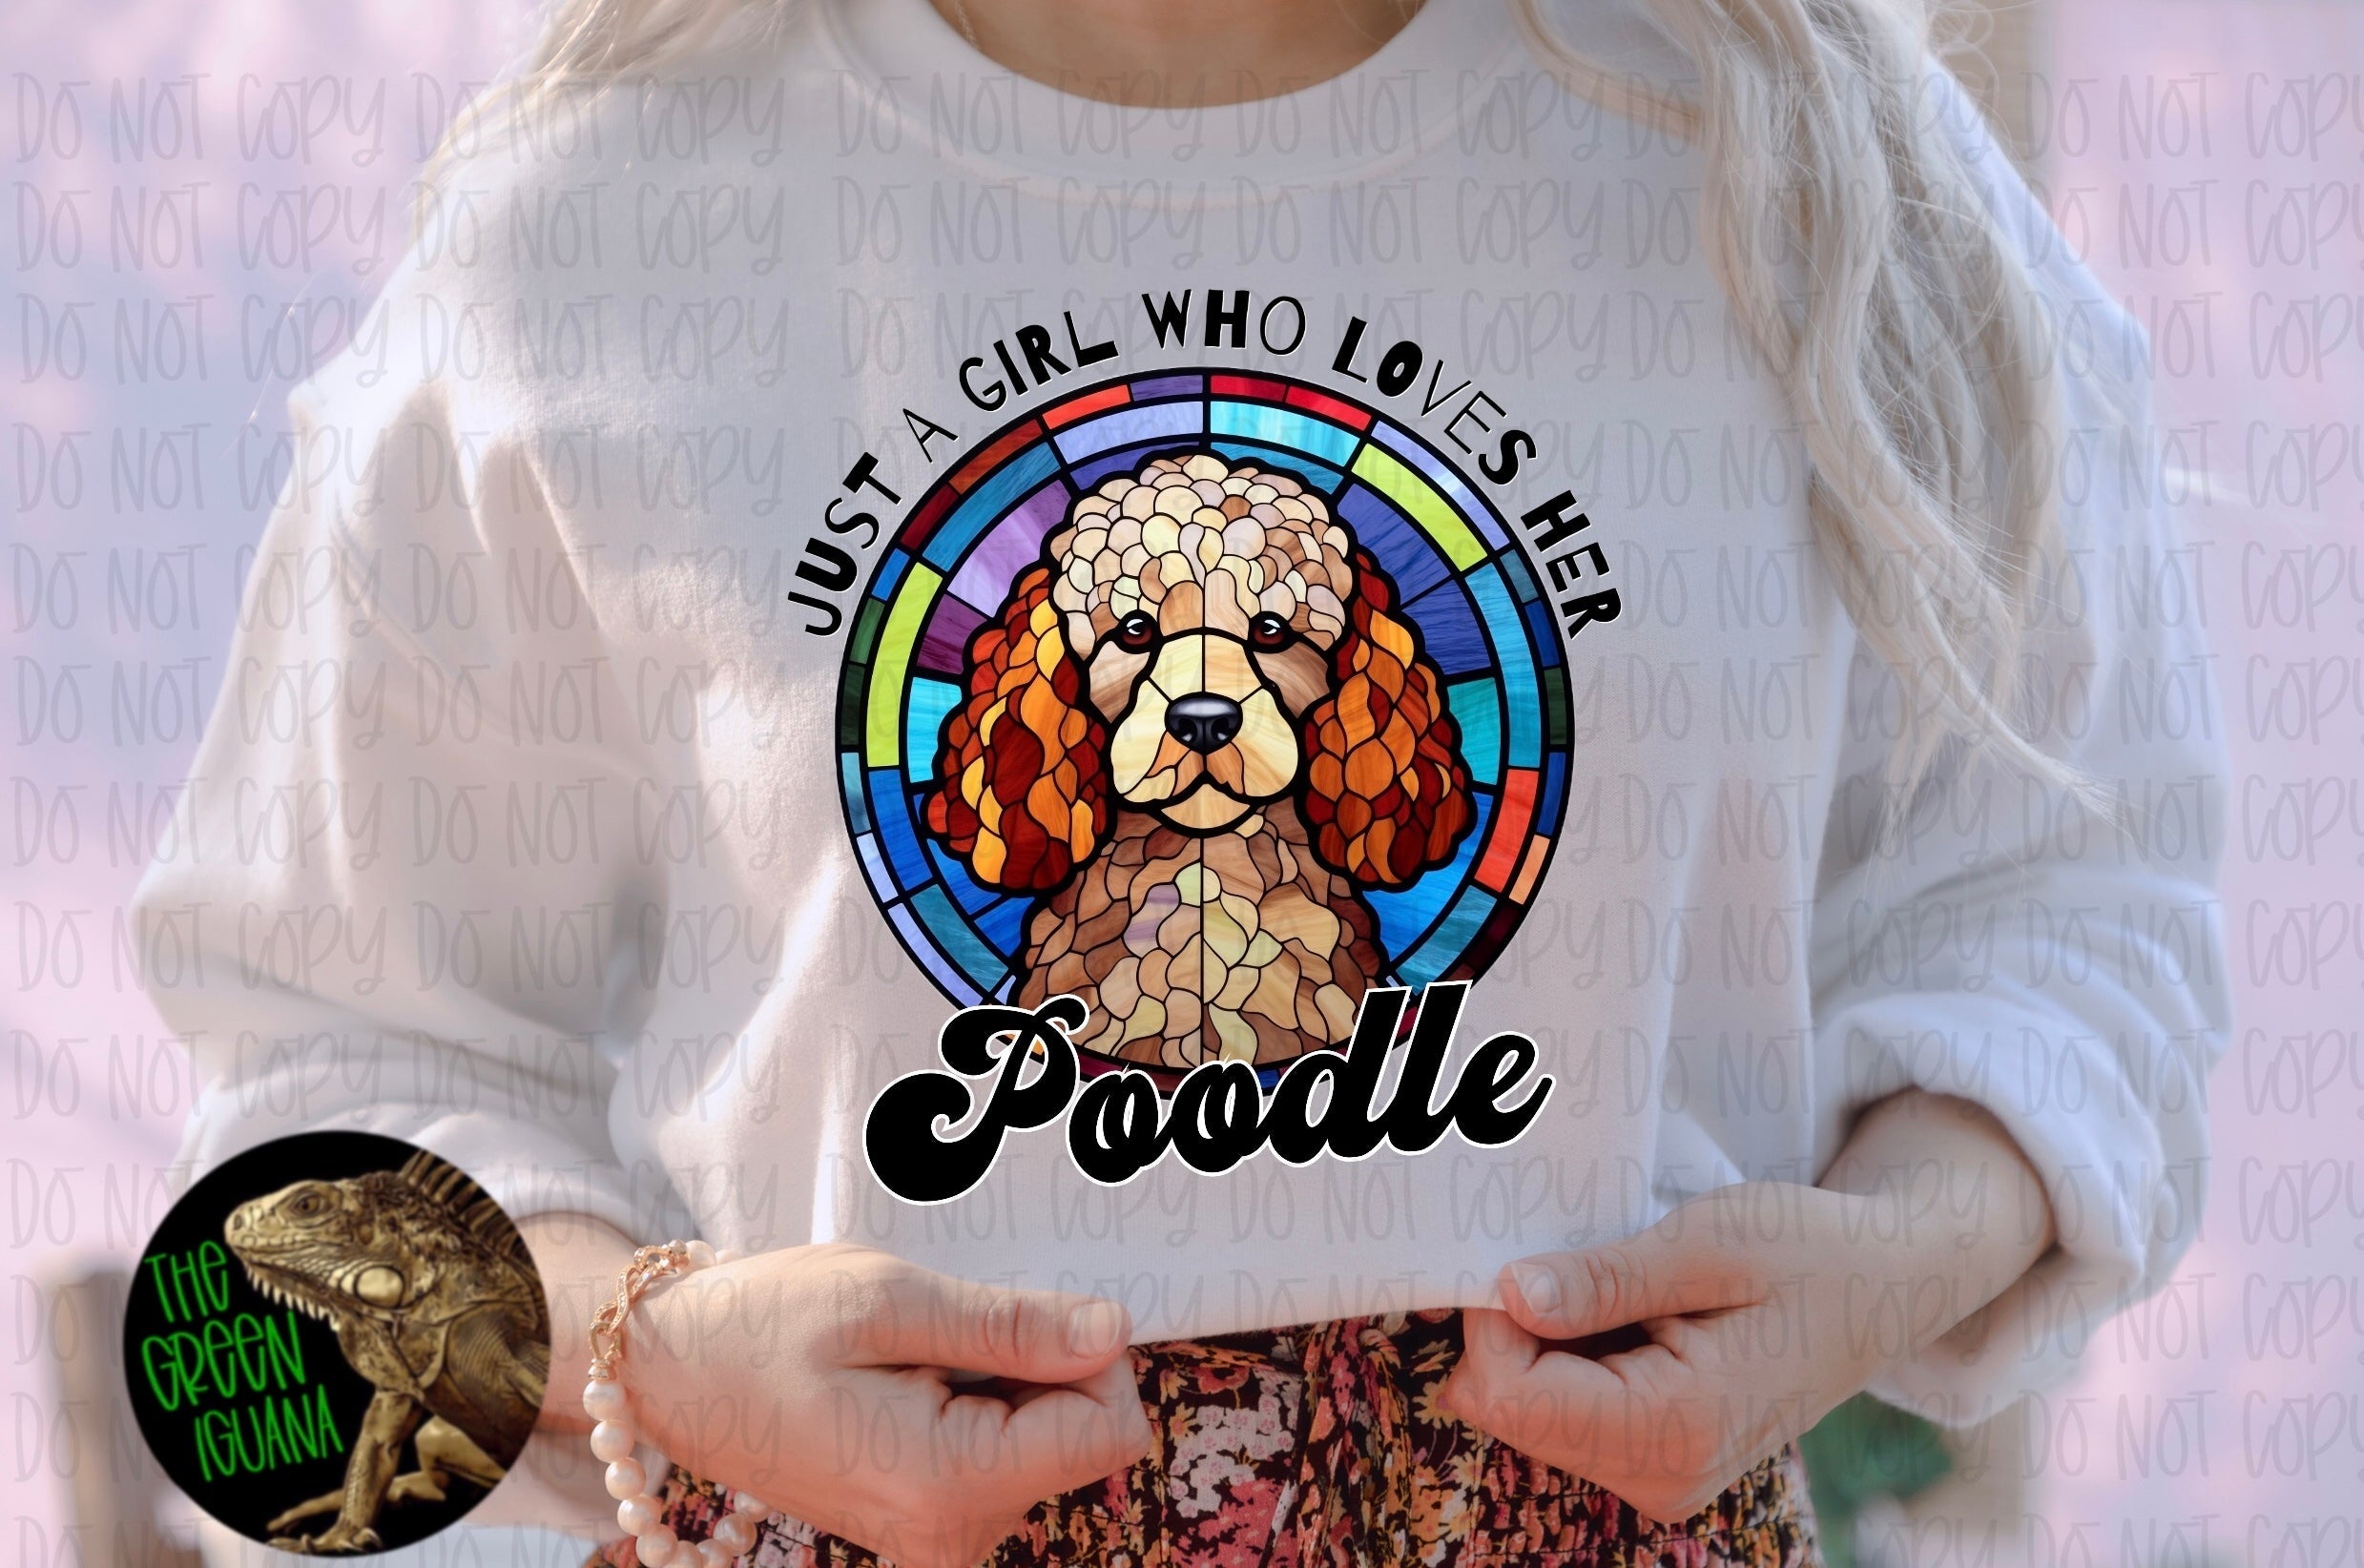 Just a girl who loves her Poodle